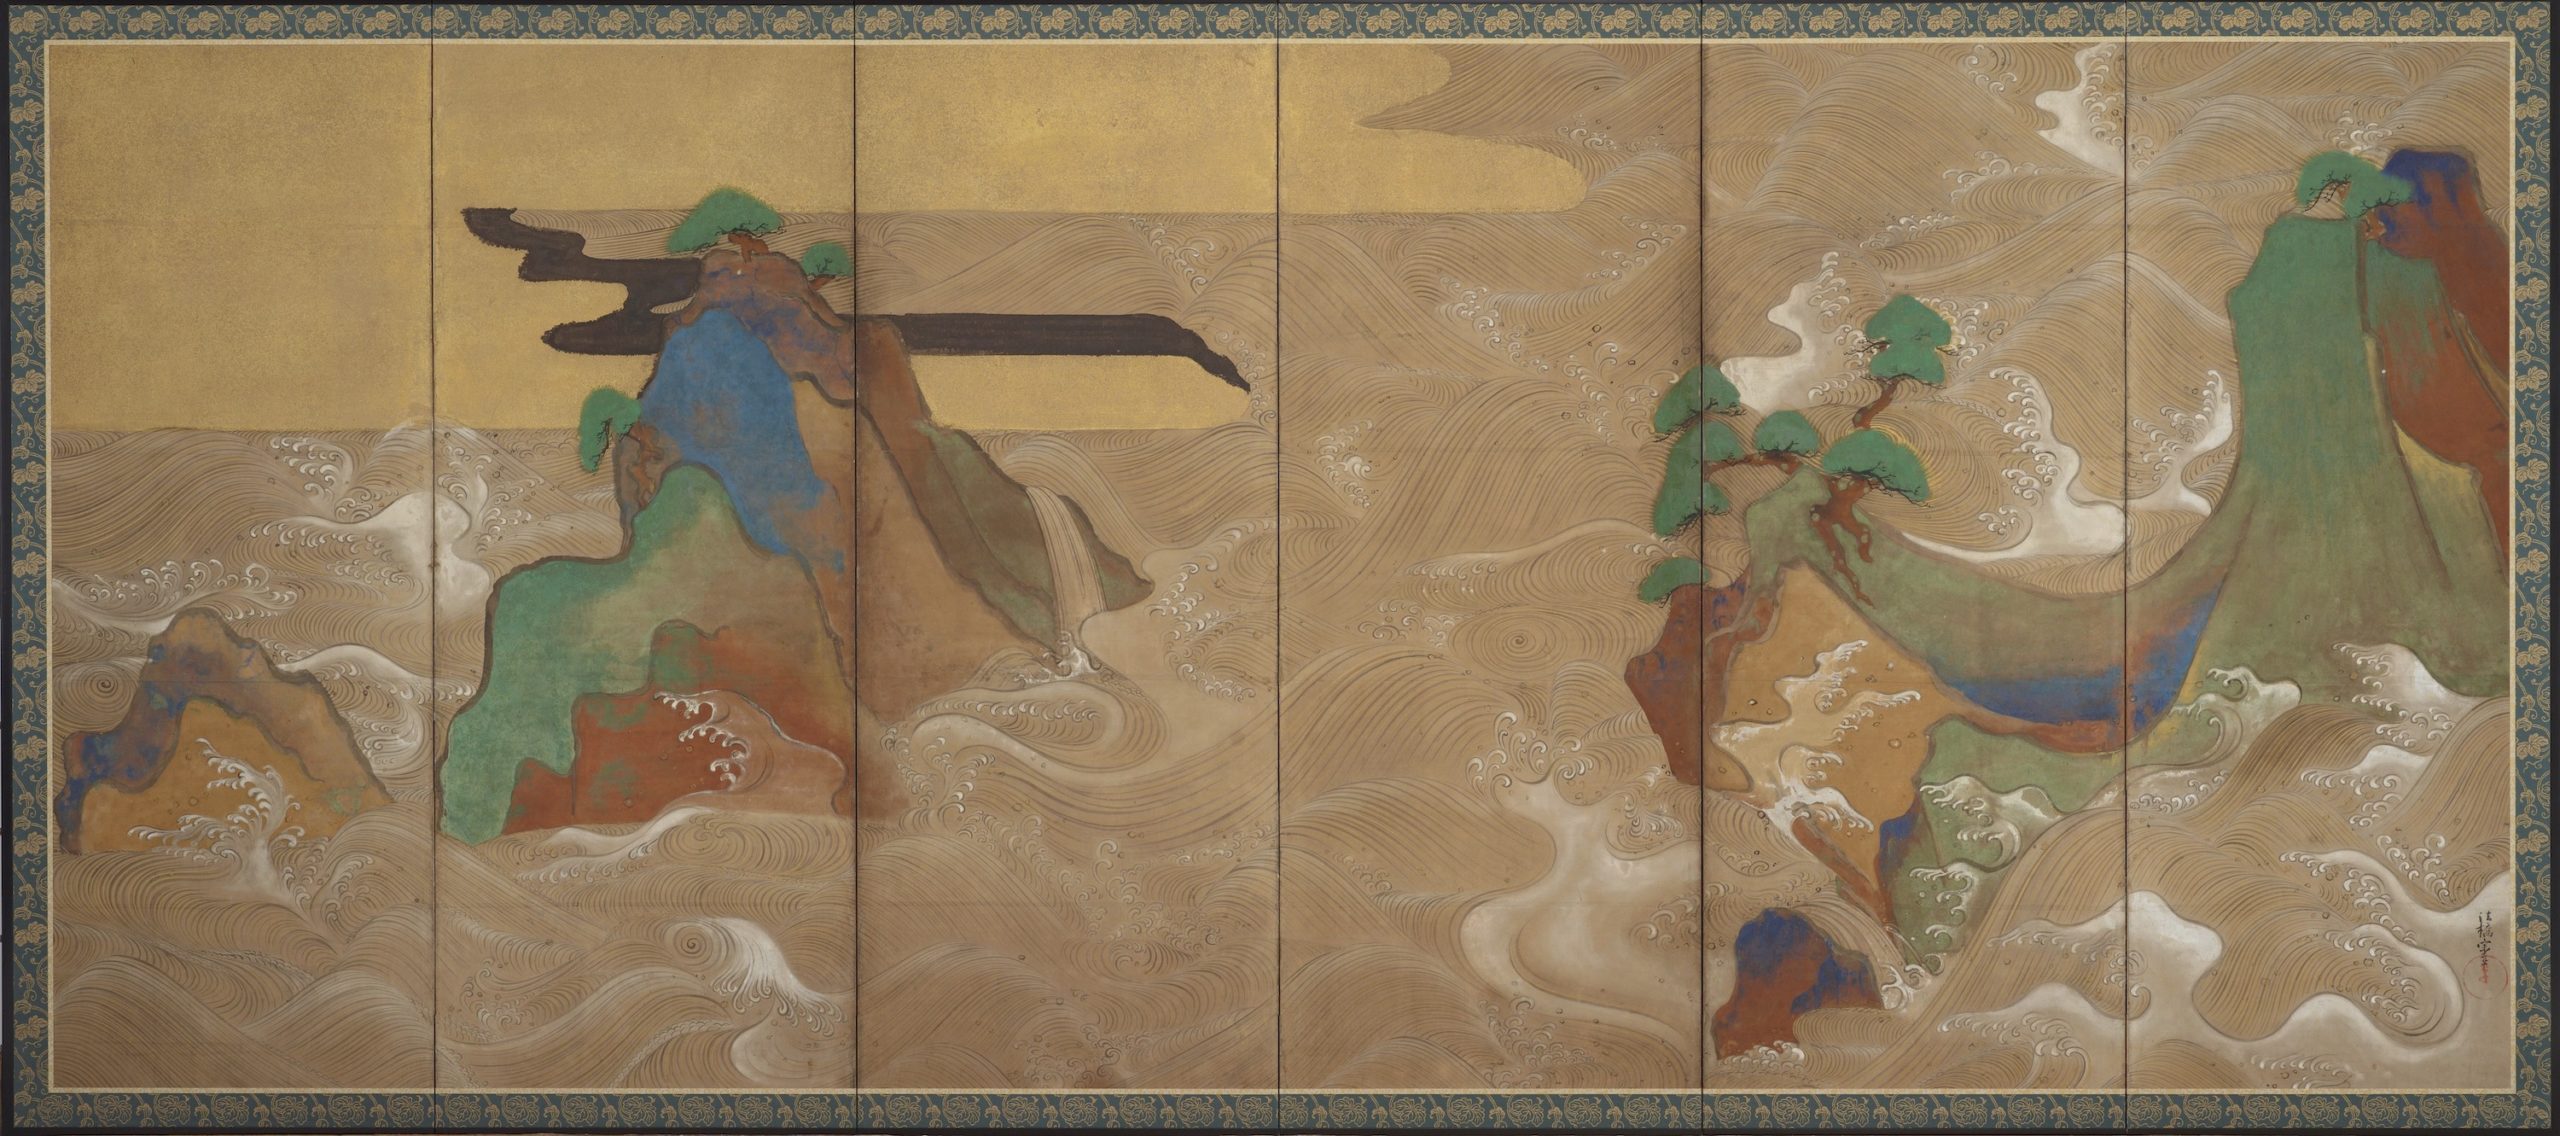 Tawaraya Sōtatsu, Waves at Matsushima, c. 1600–40, right side of a pair of six-panel folding screens, ink, color, gold, and silver on paper (National Museum of Asian Art, Smithsonian, Washington, D.C.)